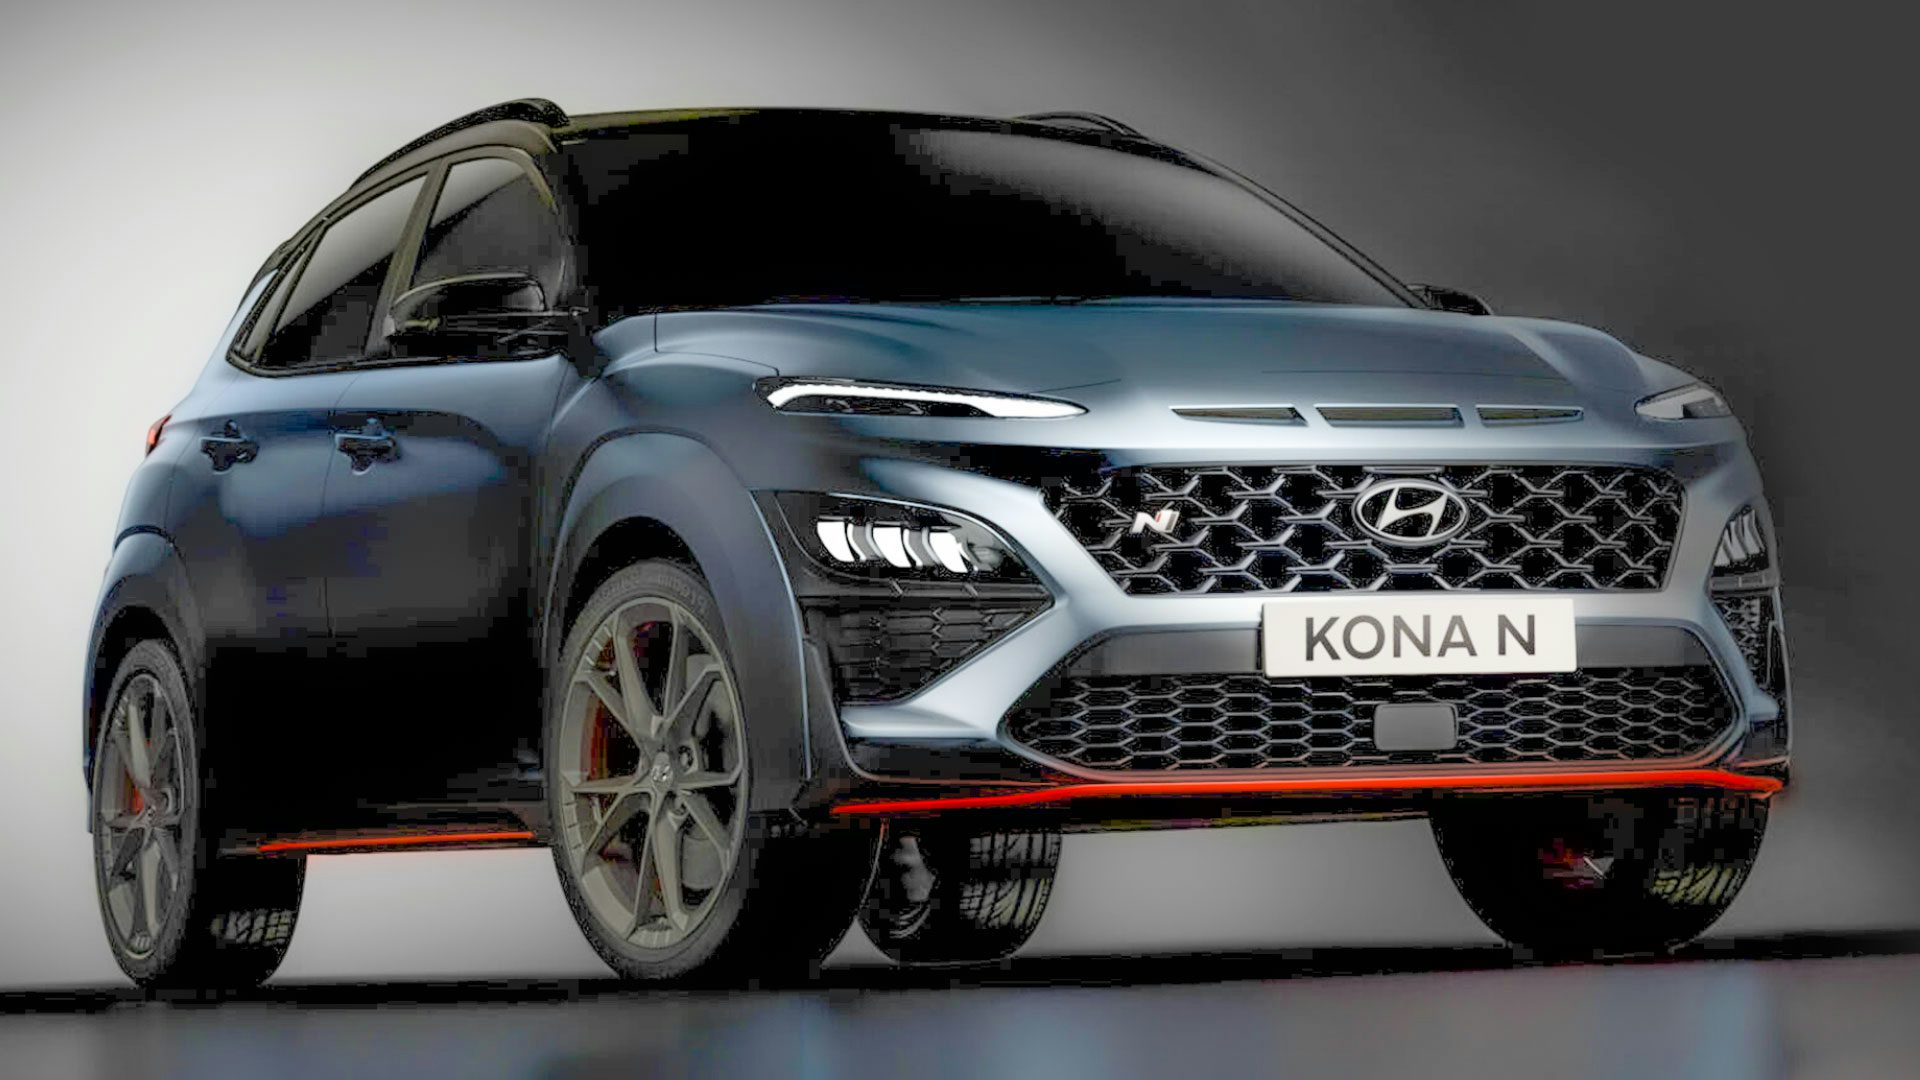 2021 Hyundai Kona N revealed in teaser images: price, specs and release ...